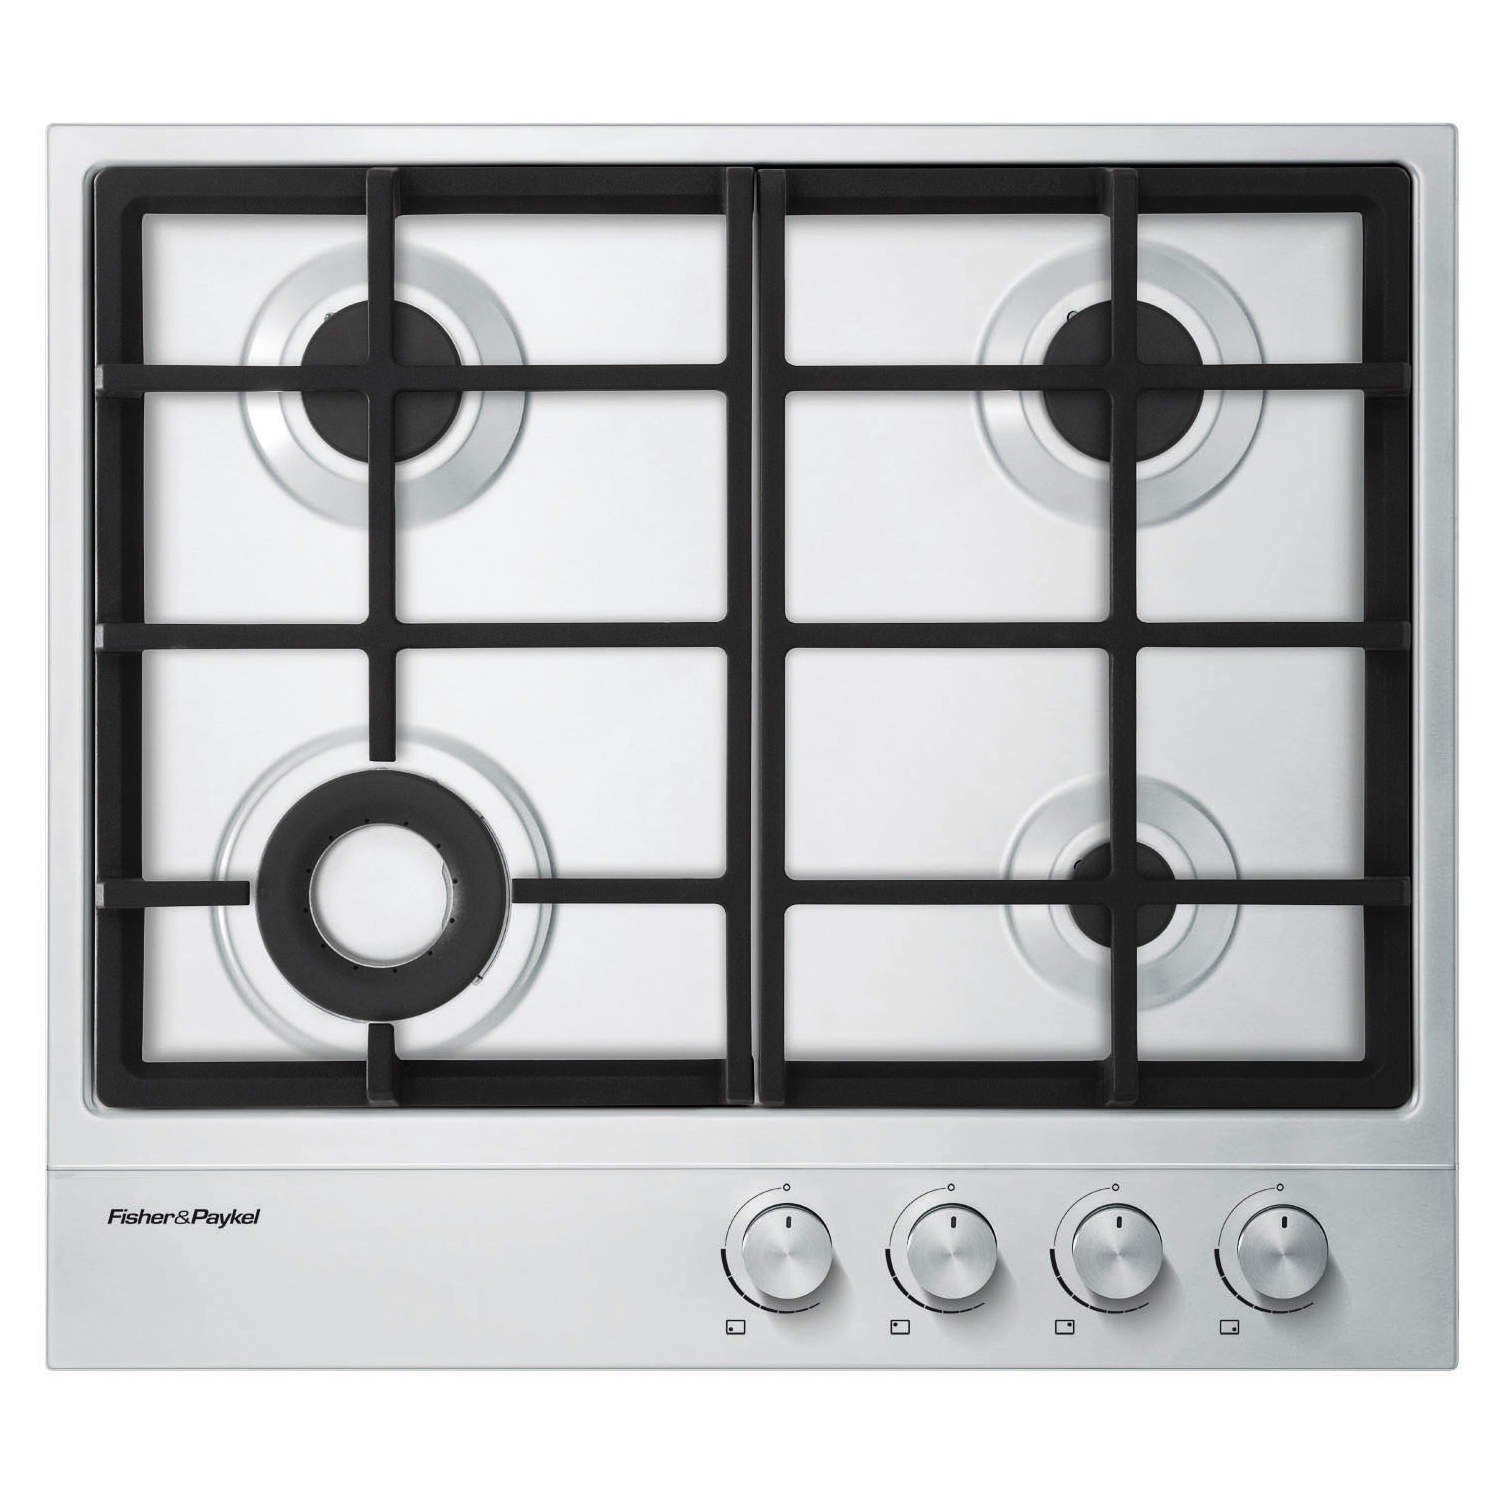 Fisher & Paykel 60cm 4 Burner Gas Hob - Stainless Steel